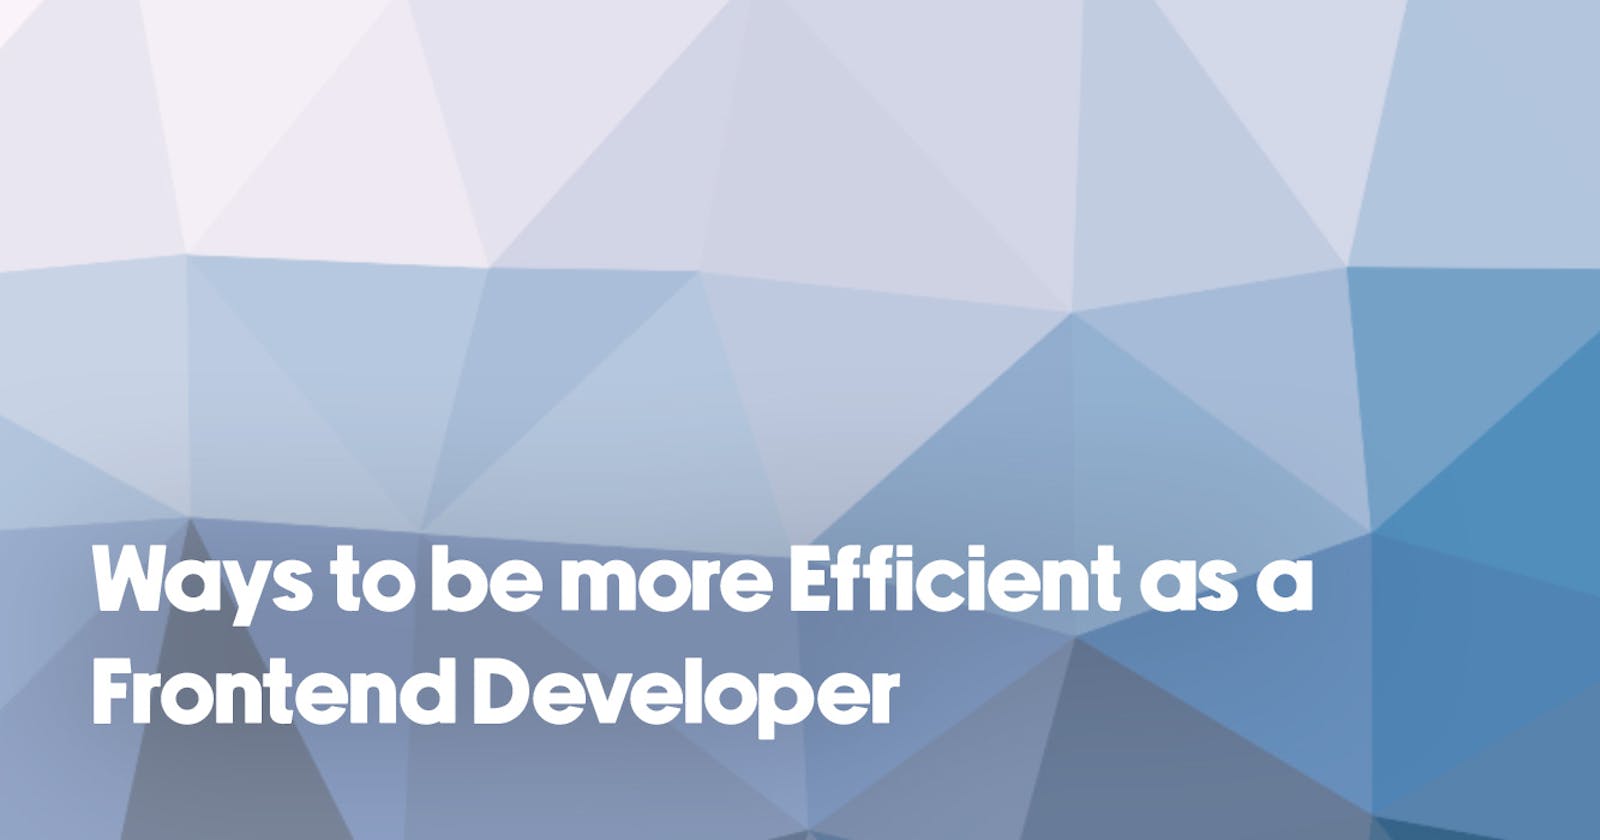 Ways to be more Efficient as a Frontend Developer